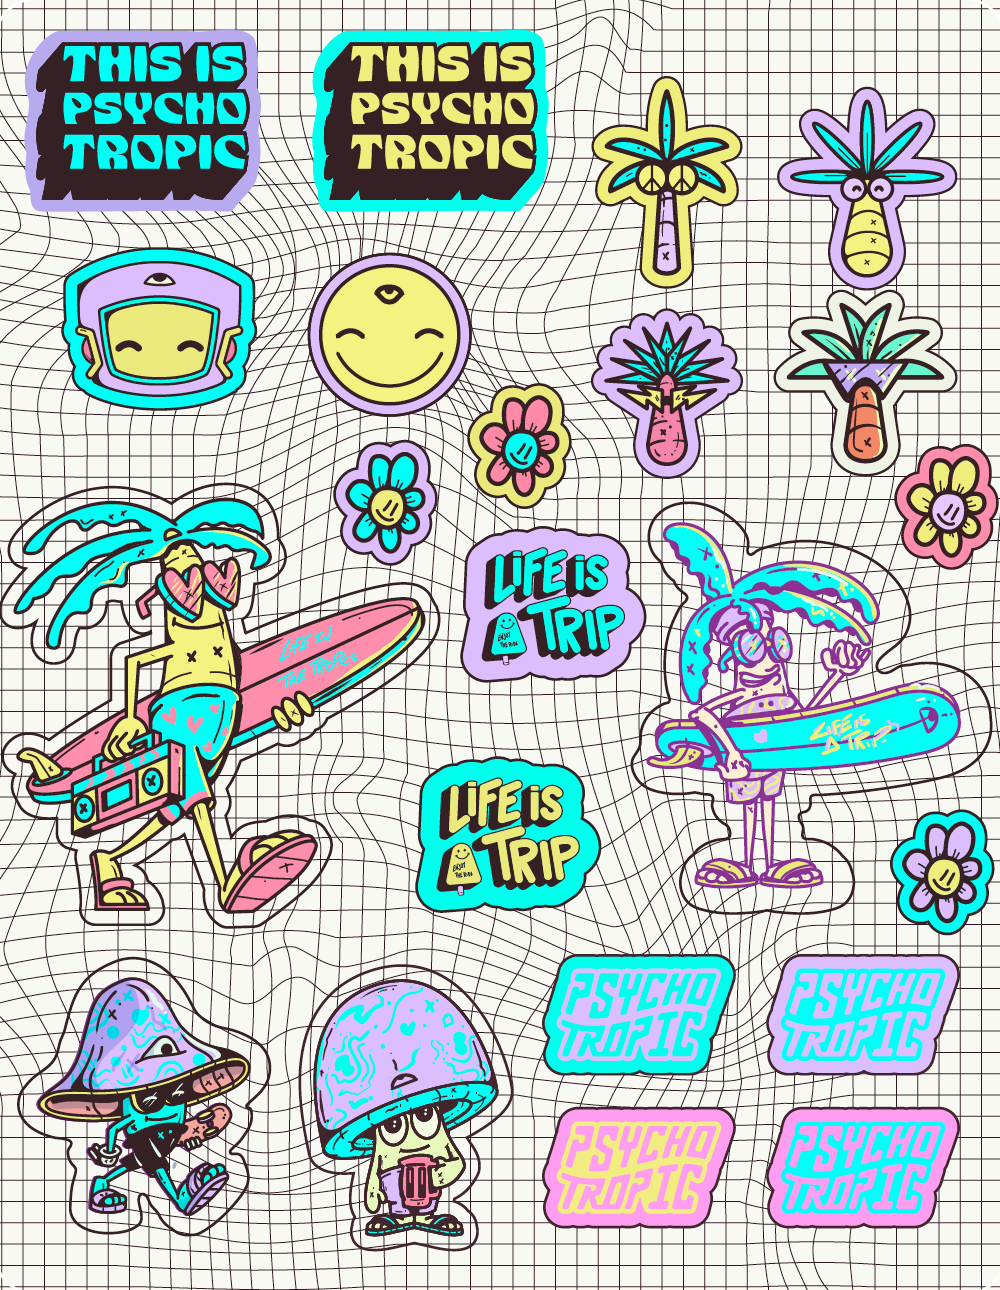 This is Psycho Tropic (Sticker pack)